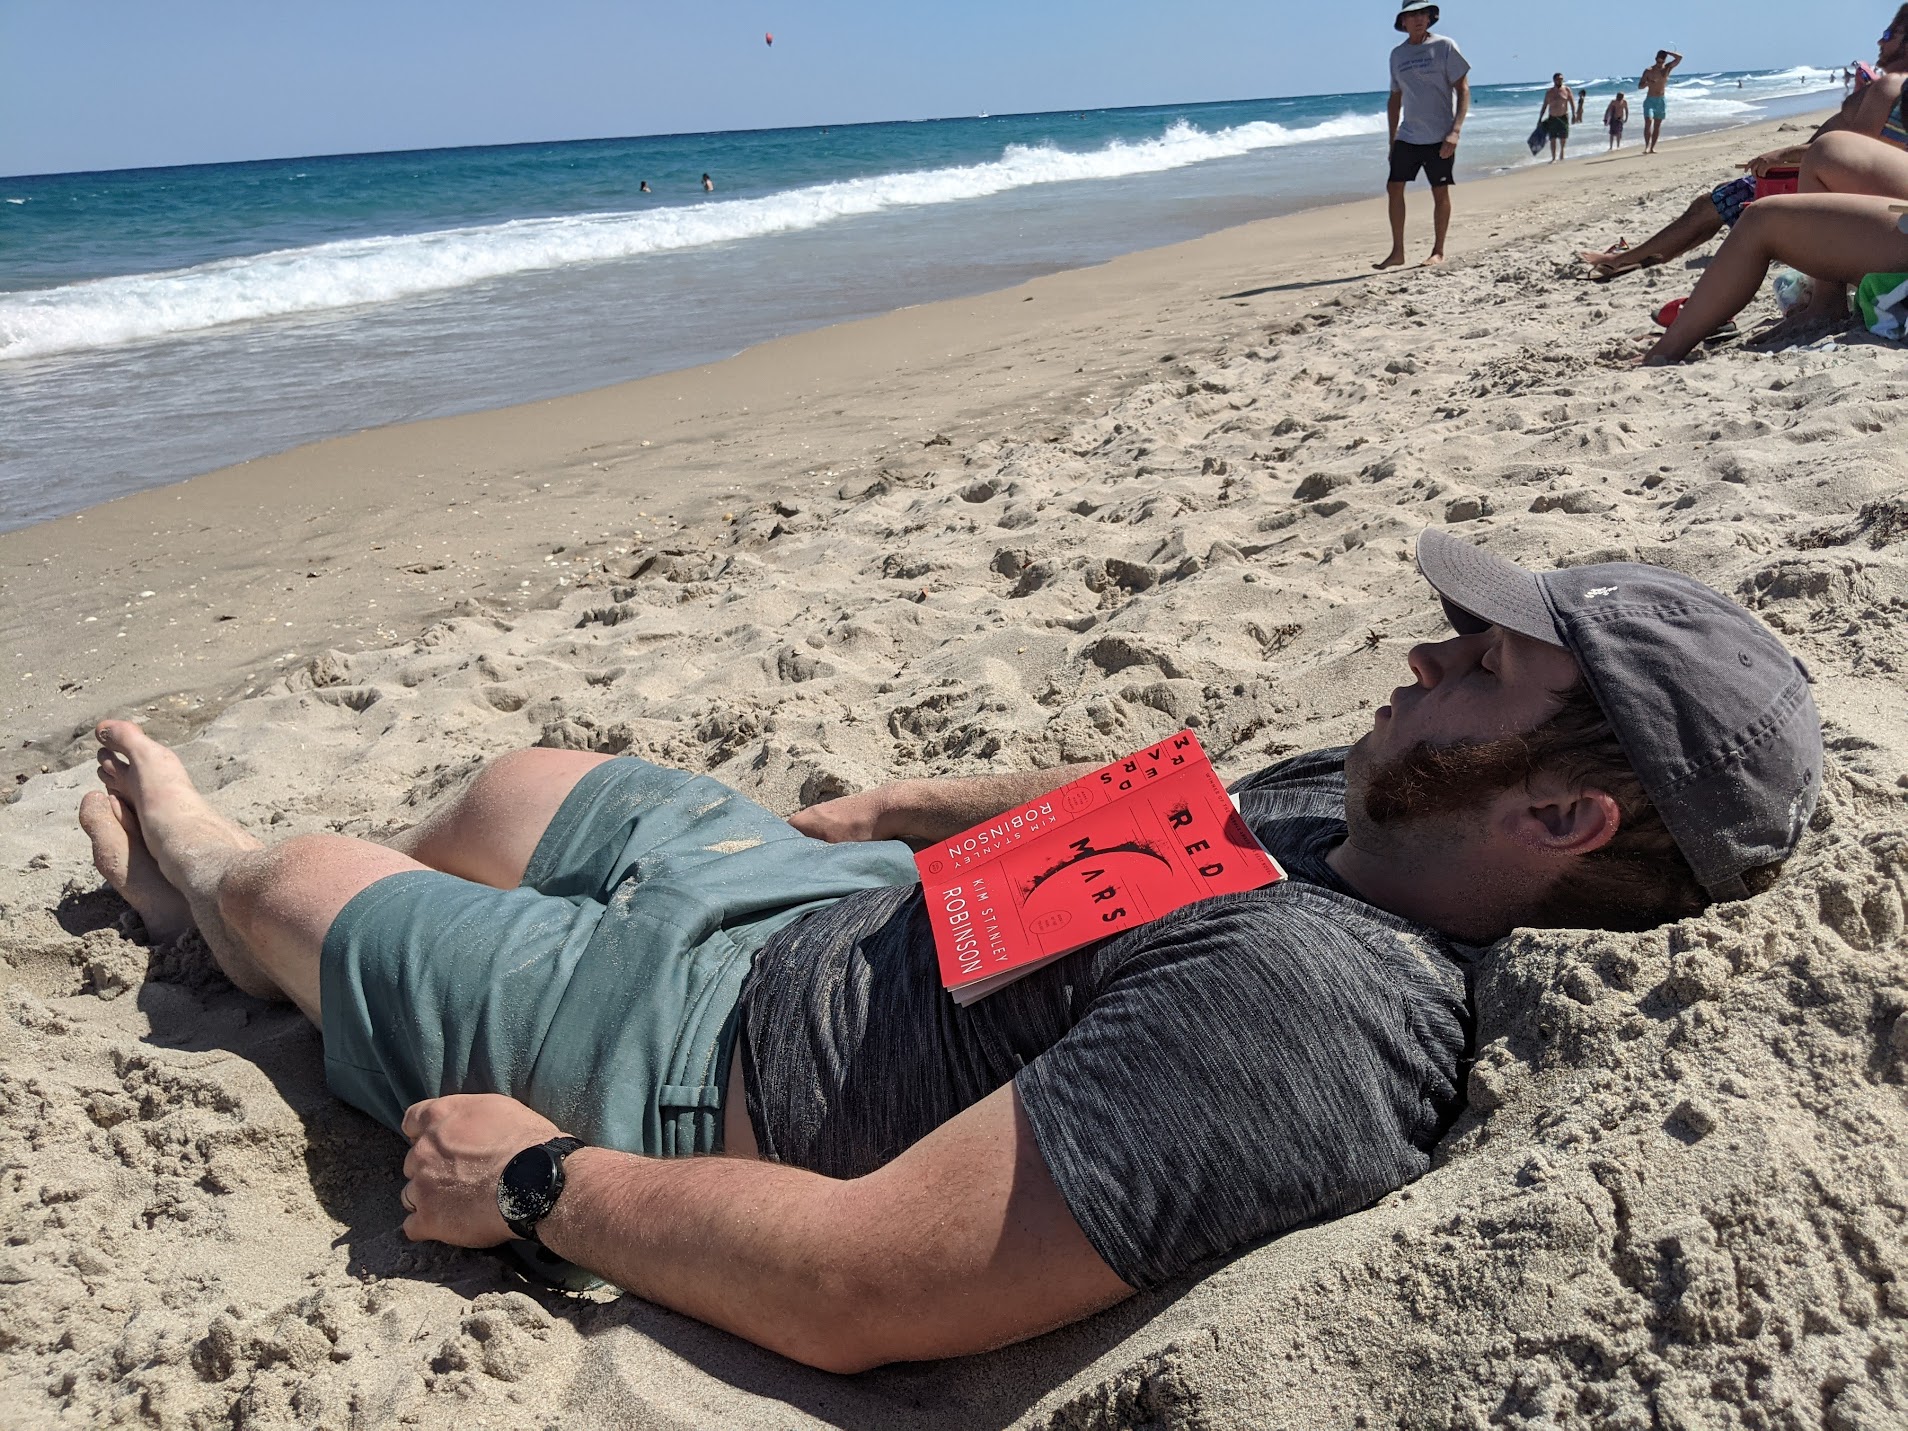 Me, dirty and unshaven, sleeping on a beach